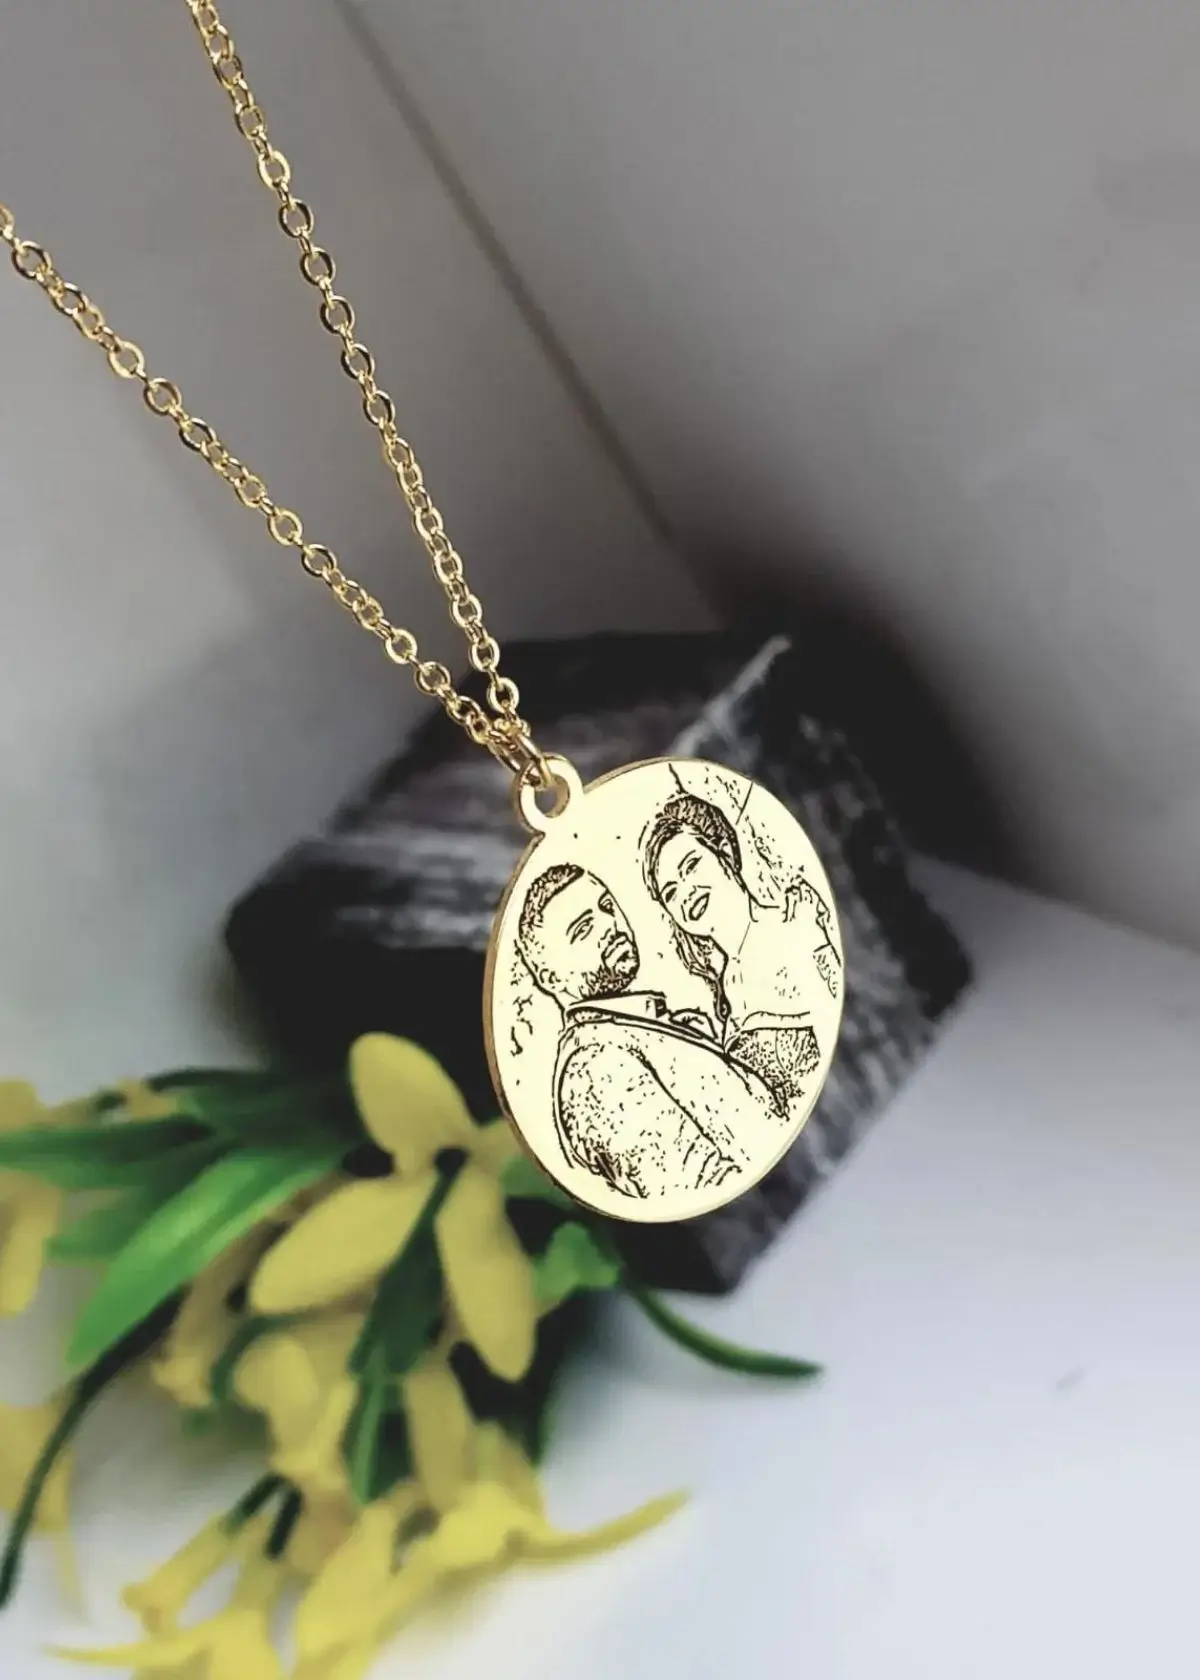 How are the Portraits made for Portrait Necklaces?